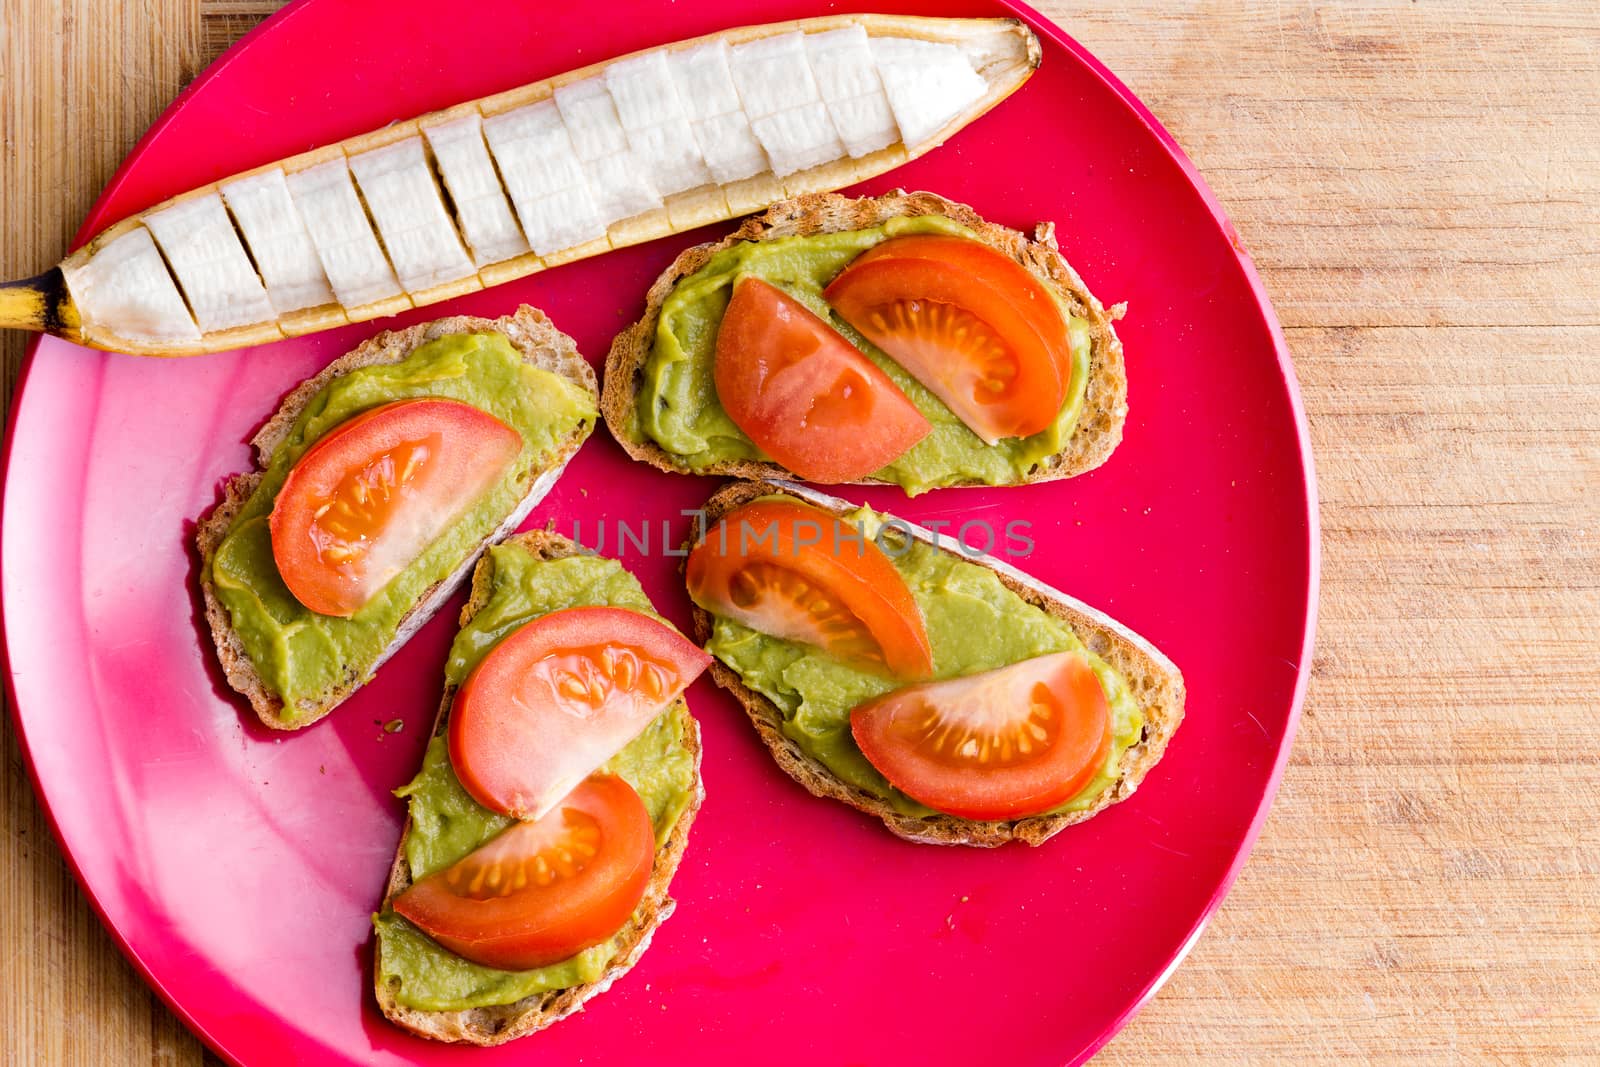 Sliced banana with four avocado sandwiches by coskun